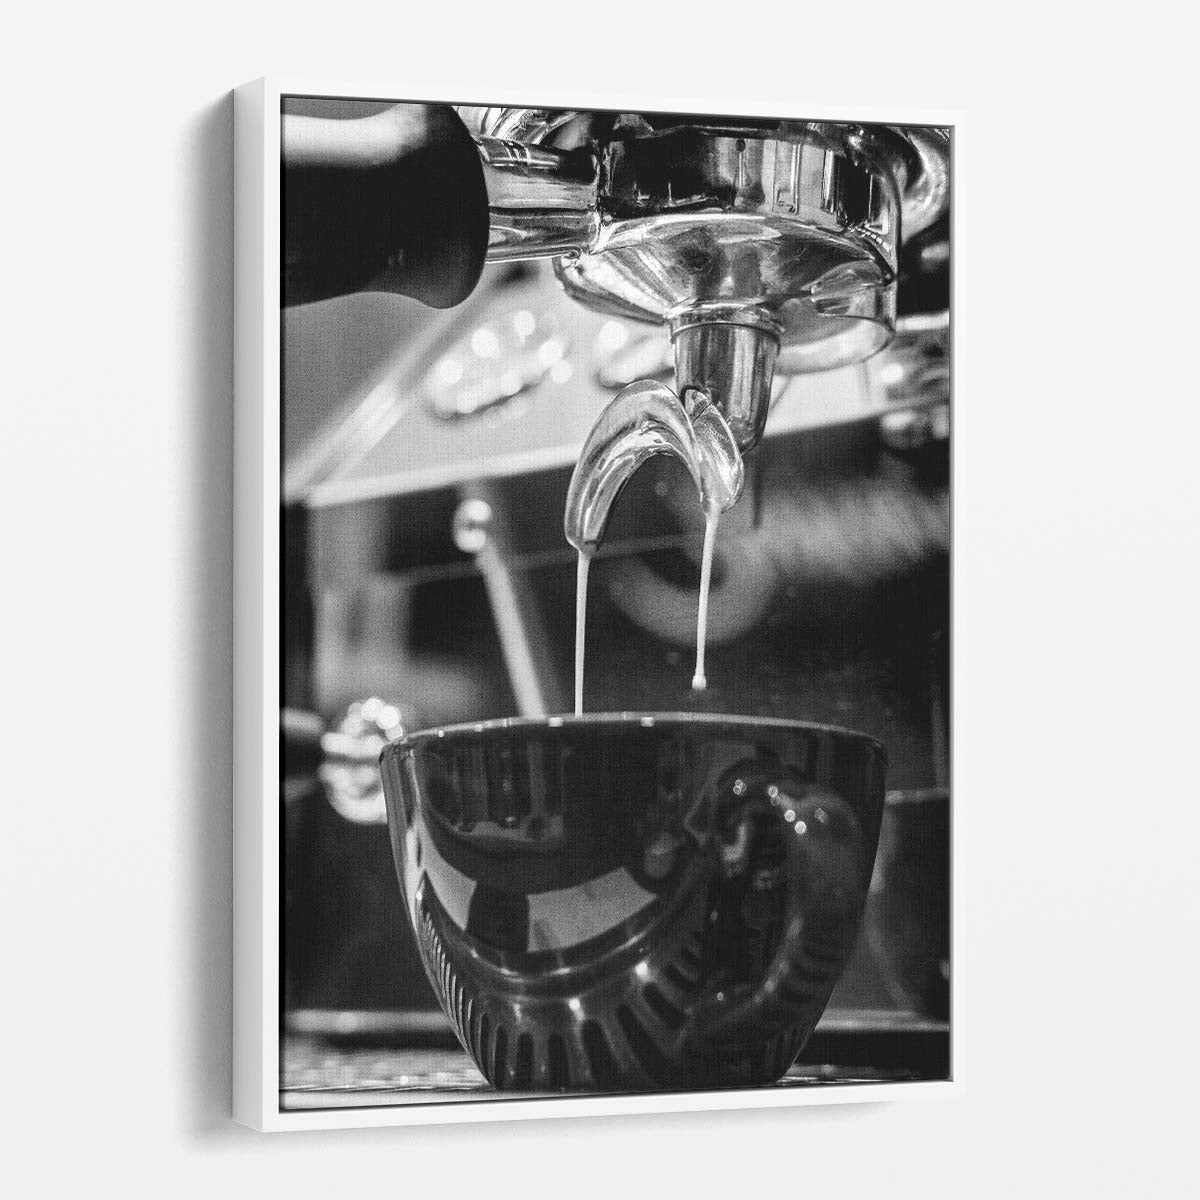 Monochrome Coffee Dripping Cup Still Life Photography Artwork by Luxuriance Designs, made in USA